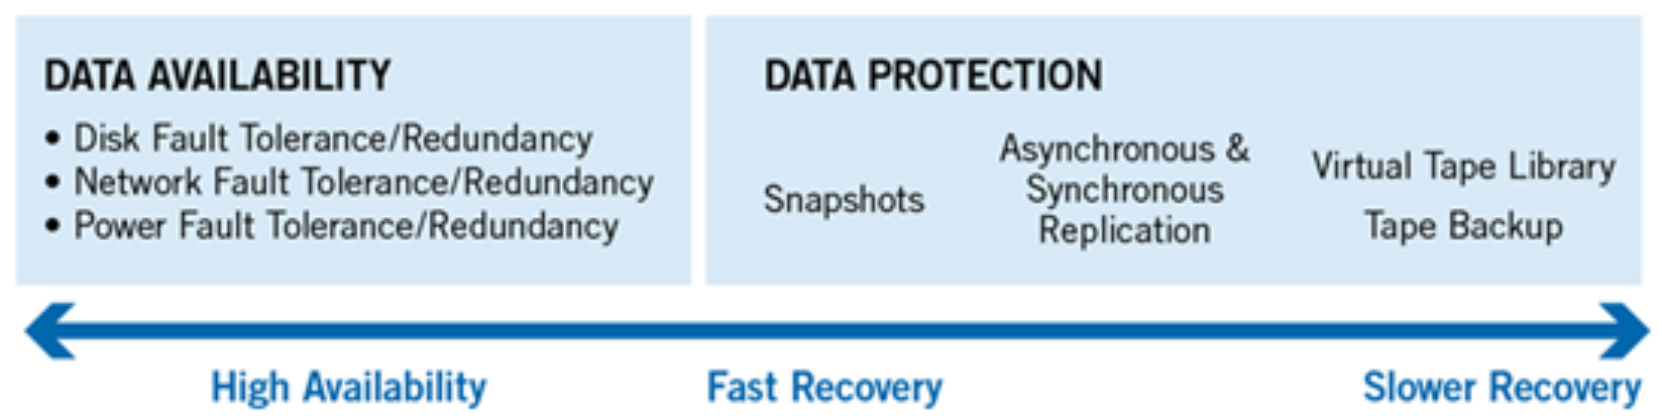 Graphic illustrating the data  protection continuum, with redundancy and fault tolerance at the beginning, moving through snapshots, replication, and finally backup to tape or VTL. 